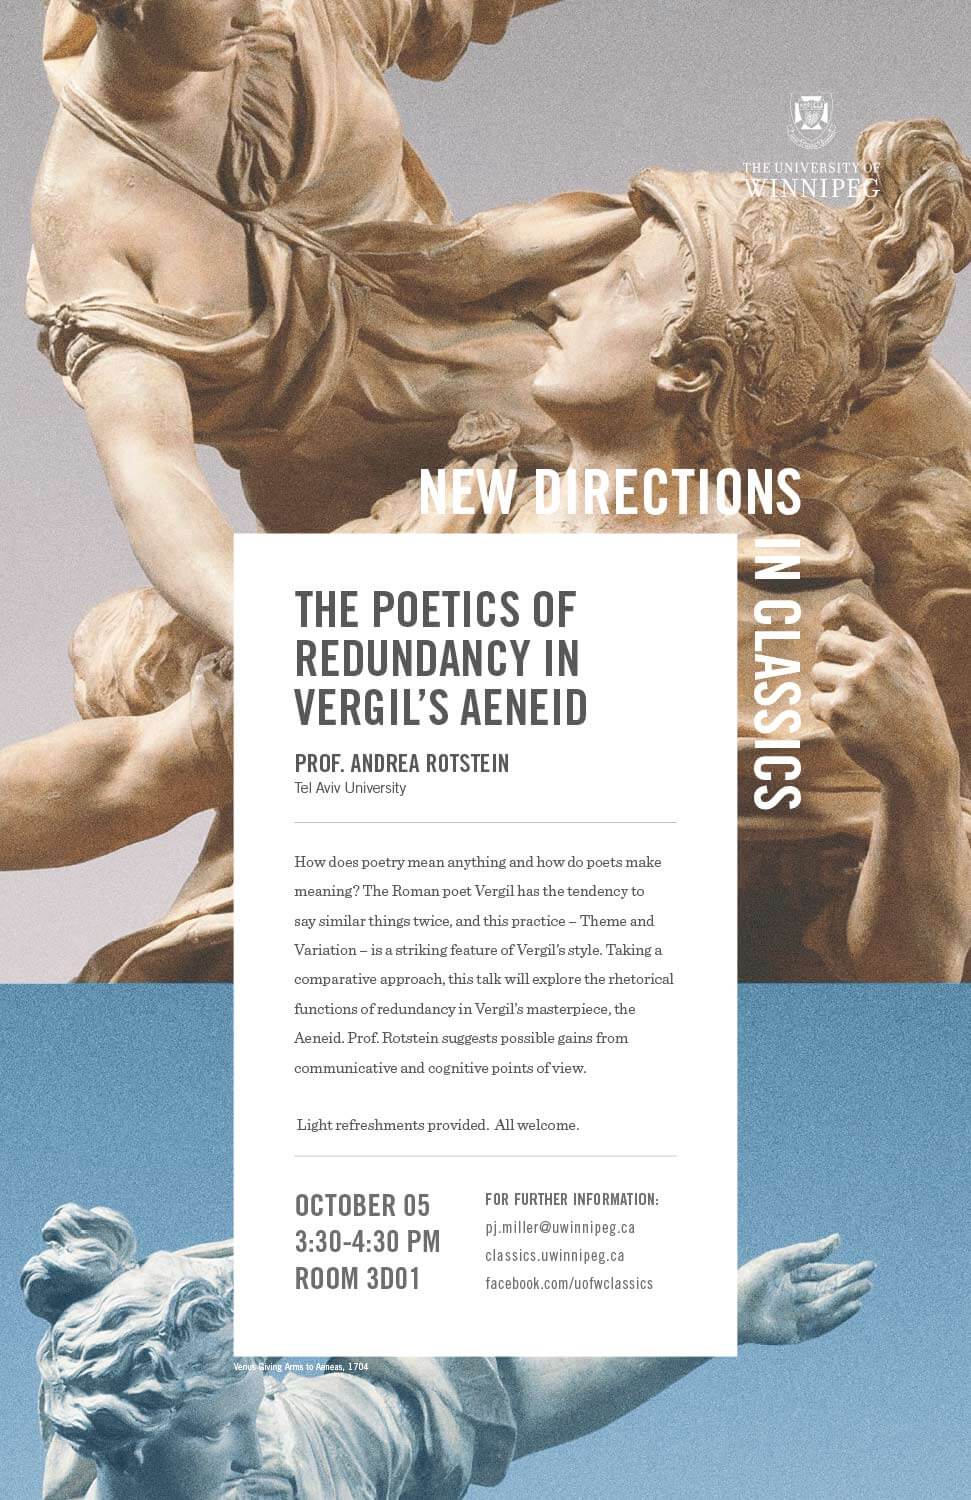 Promotional poster for Prof. Andrea Rotstein's New Directions in Classics lecture, Oct 5, 2018 (text on web page)